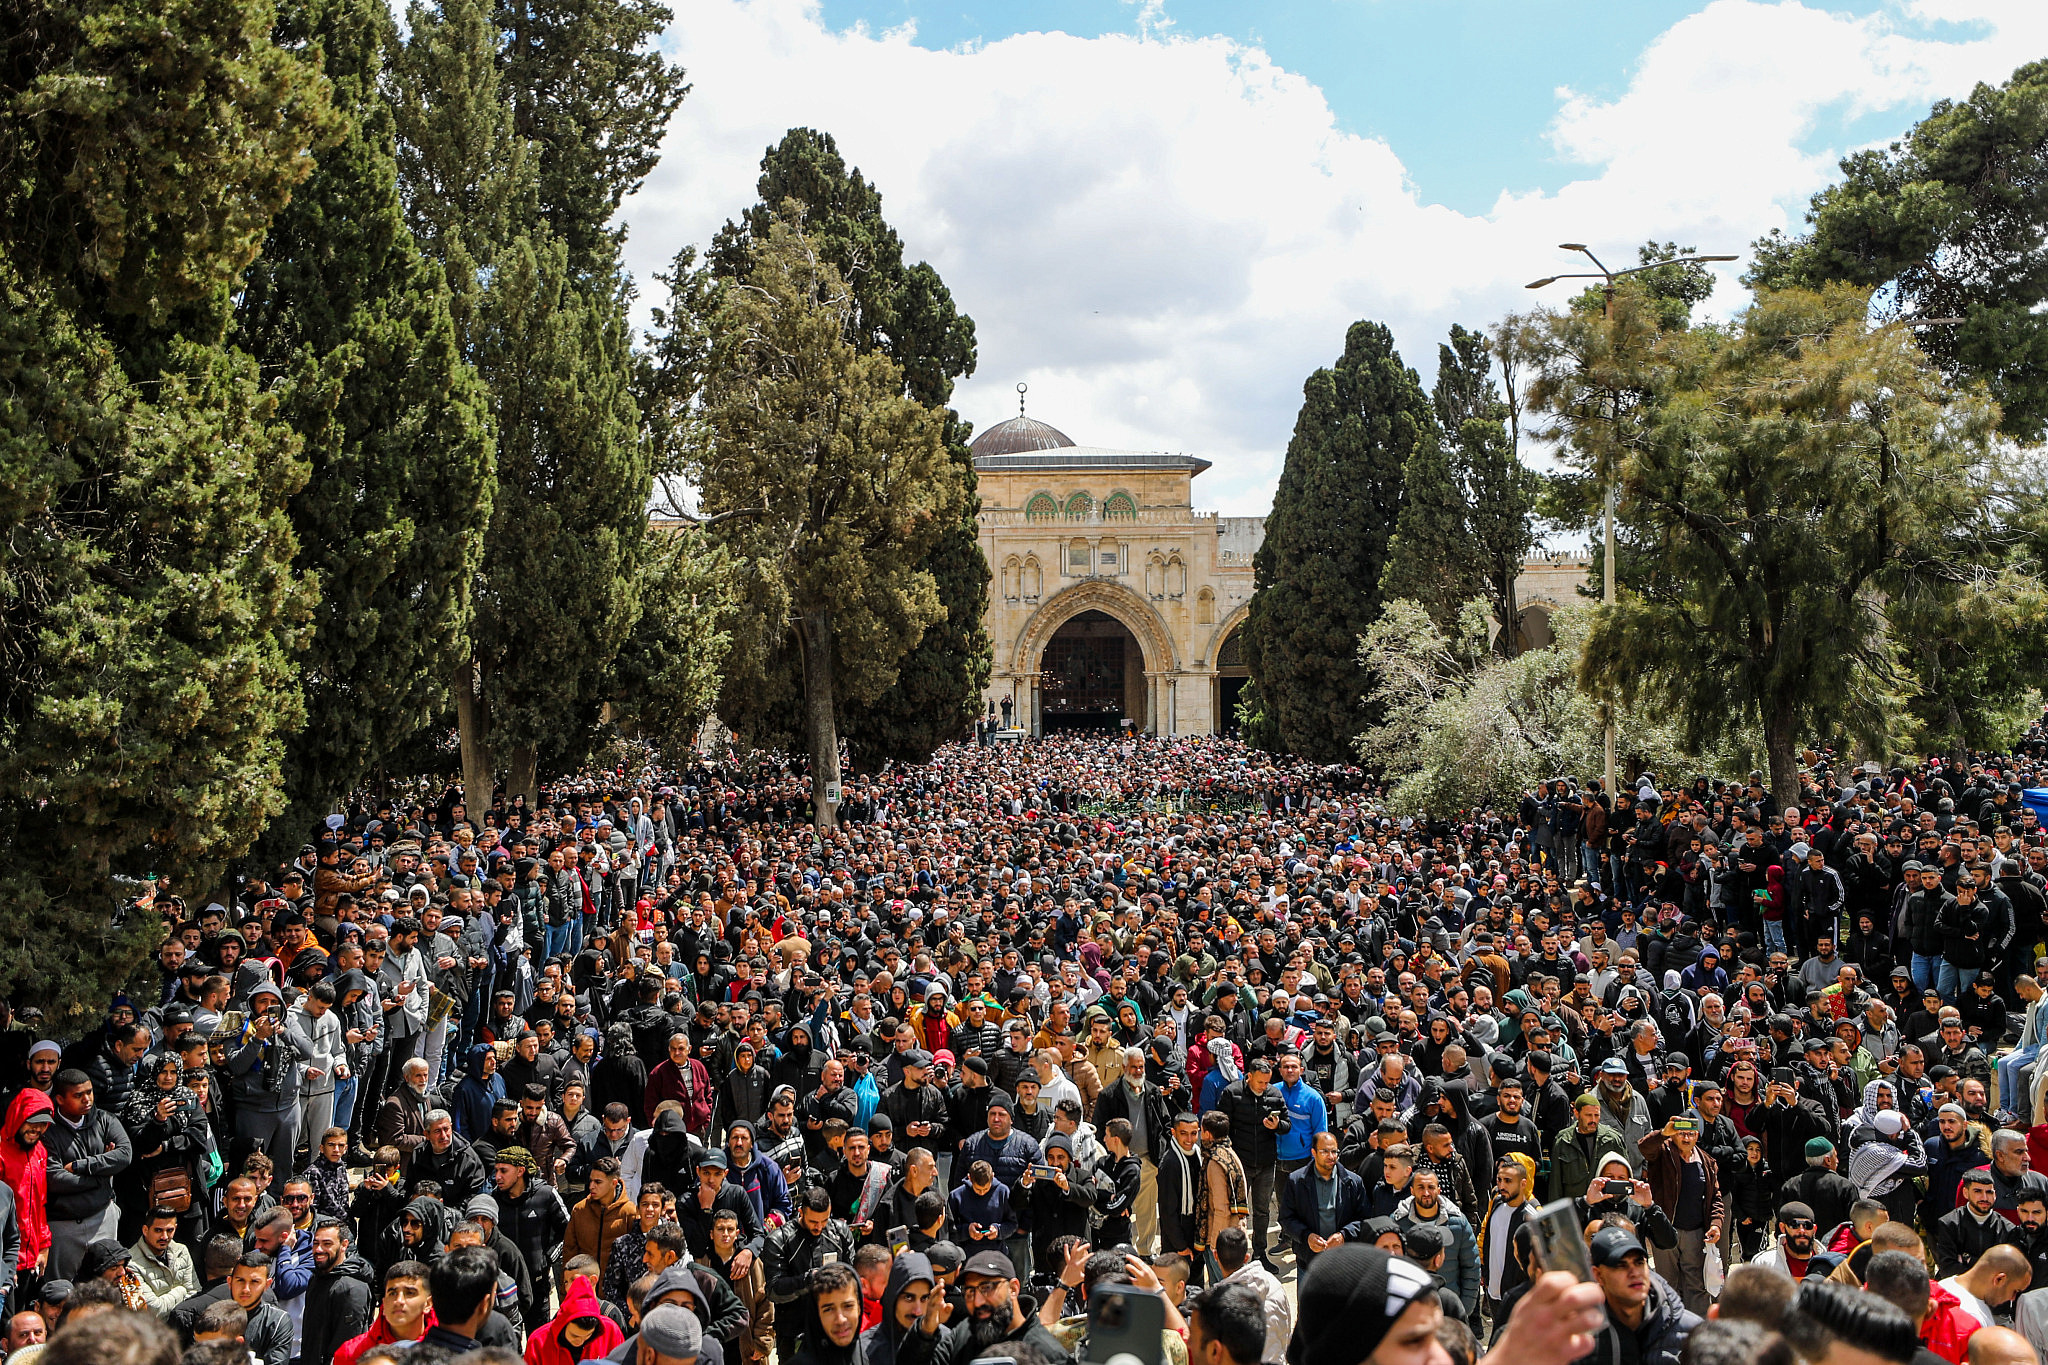 Thousands of Muslim worshipers attend the second Friday prayers of the holy month of Ramadan at Al-Aqsa Mosque Compound in Jerusalem's Old City, March 31, 2023. (Jamal Awad/Flash90(